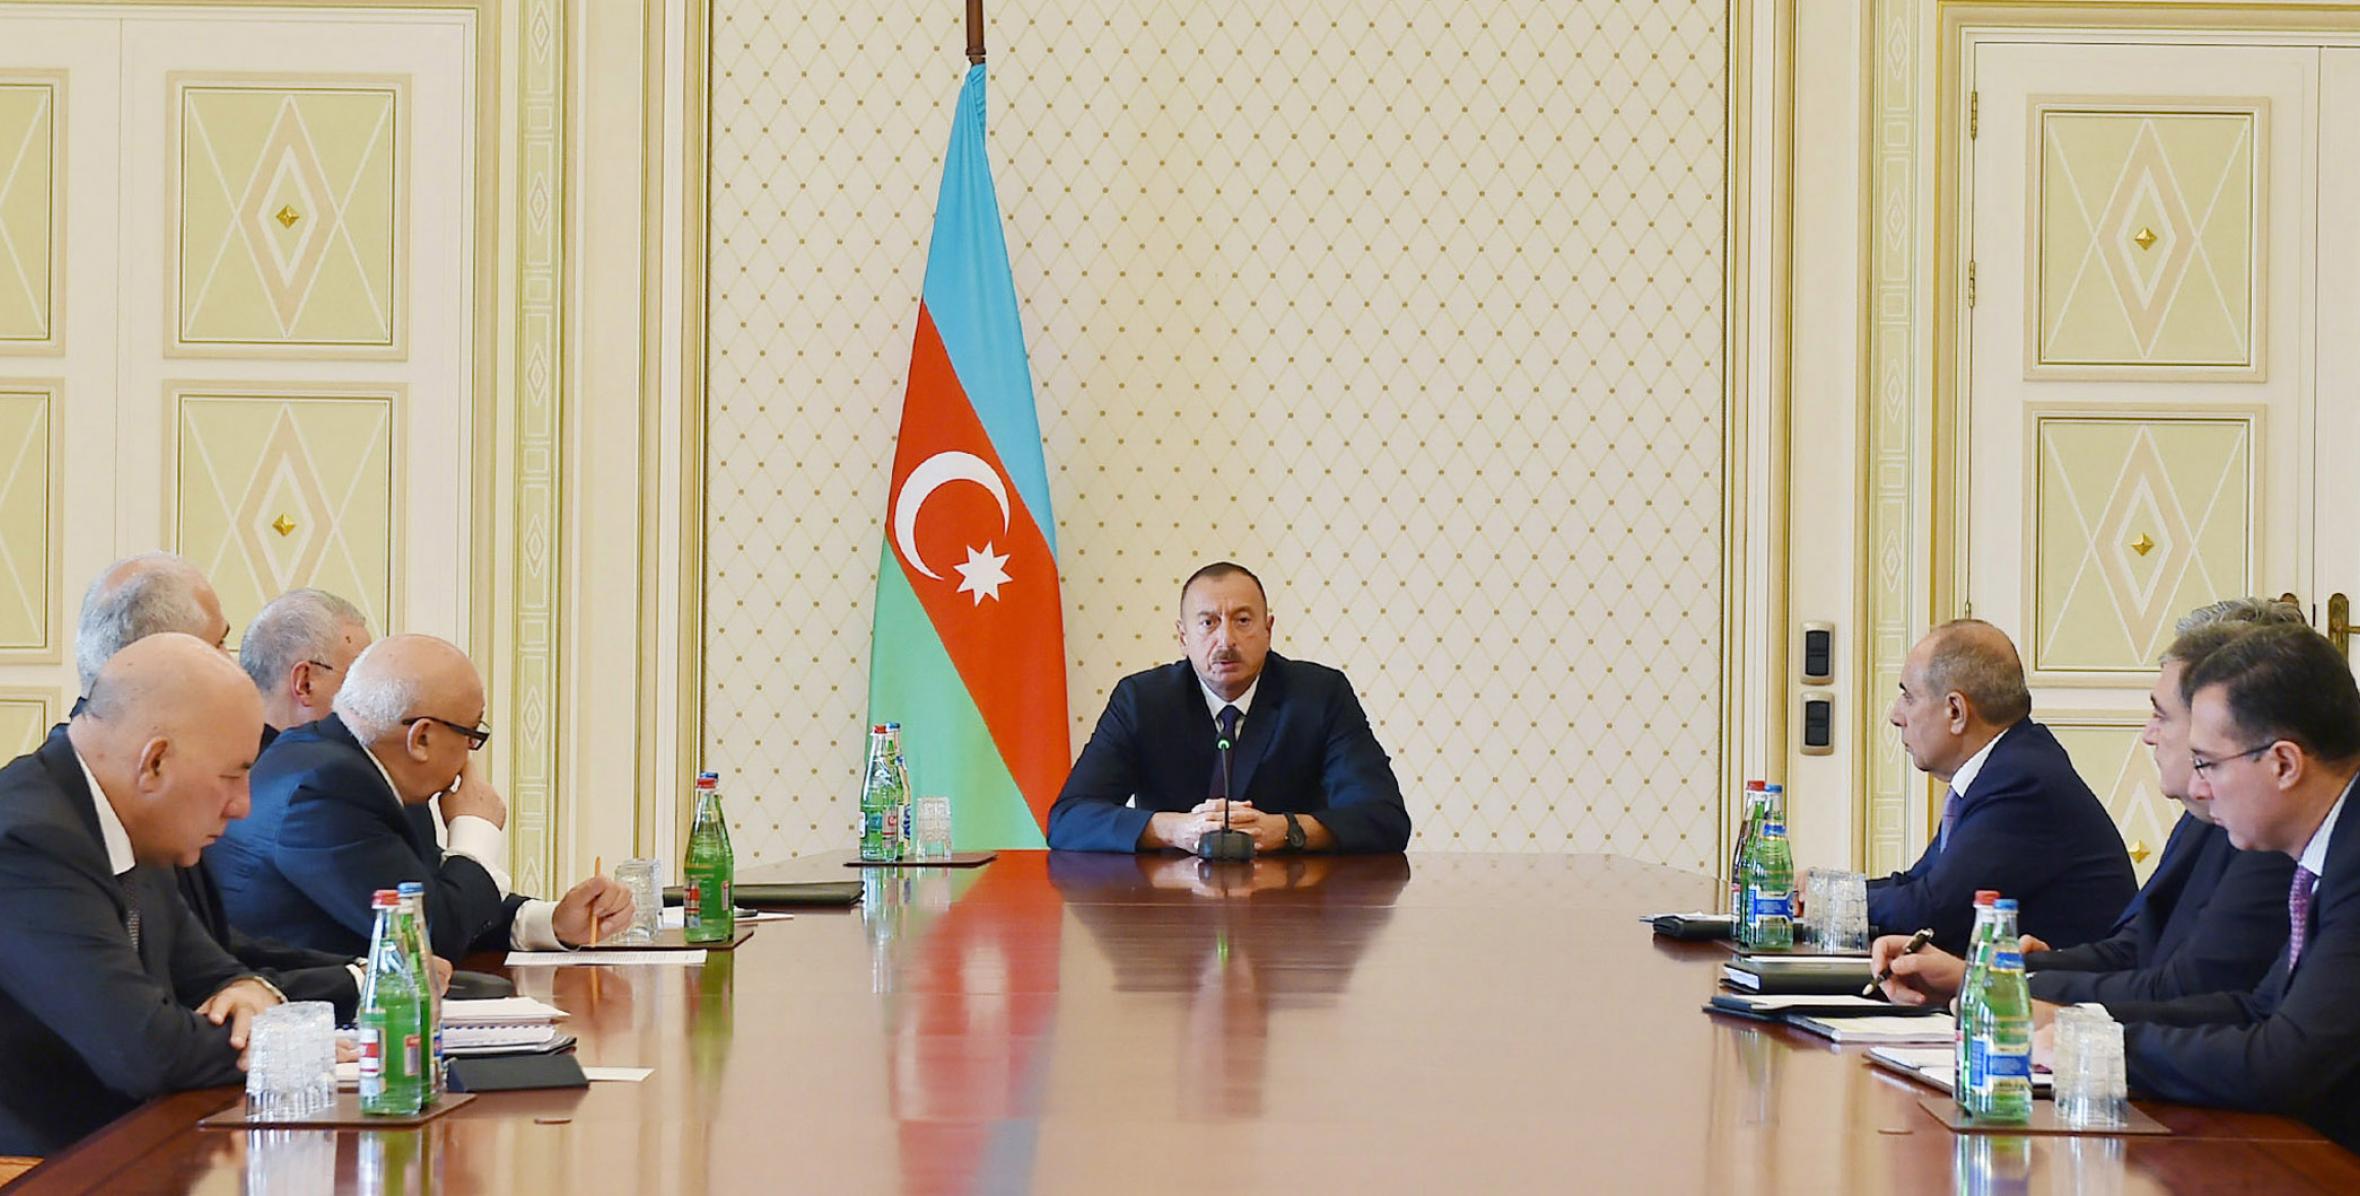 Ilham Aliyev chaired a meeting on economic issues and preparation of the State Budget for 2016